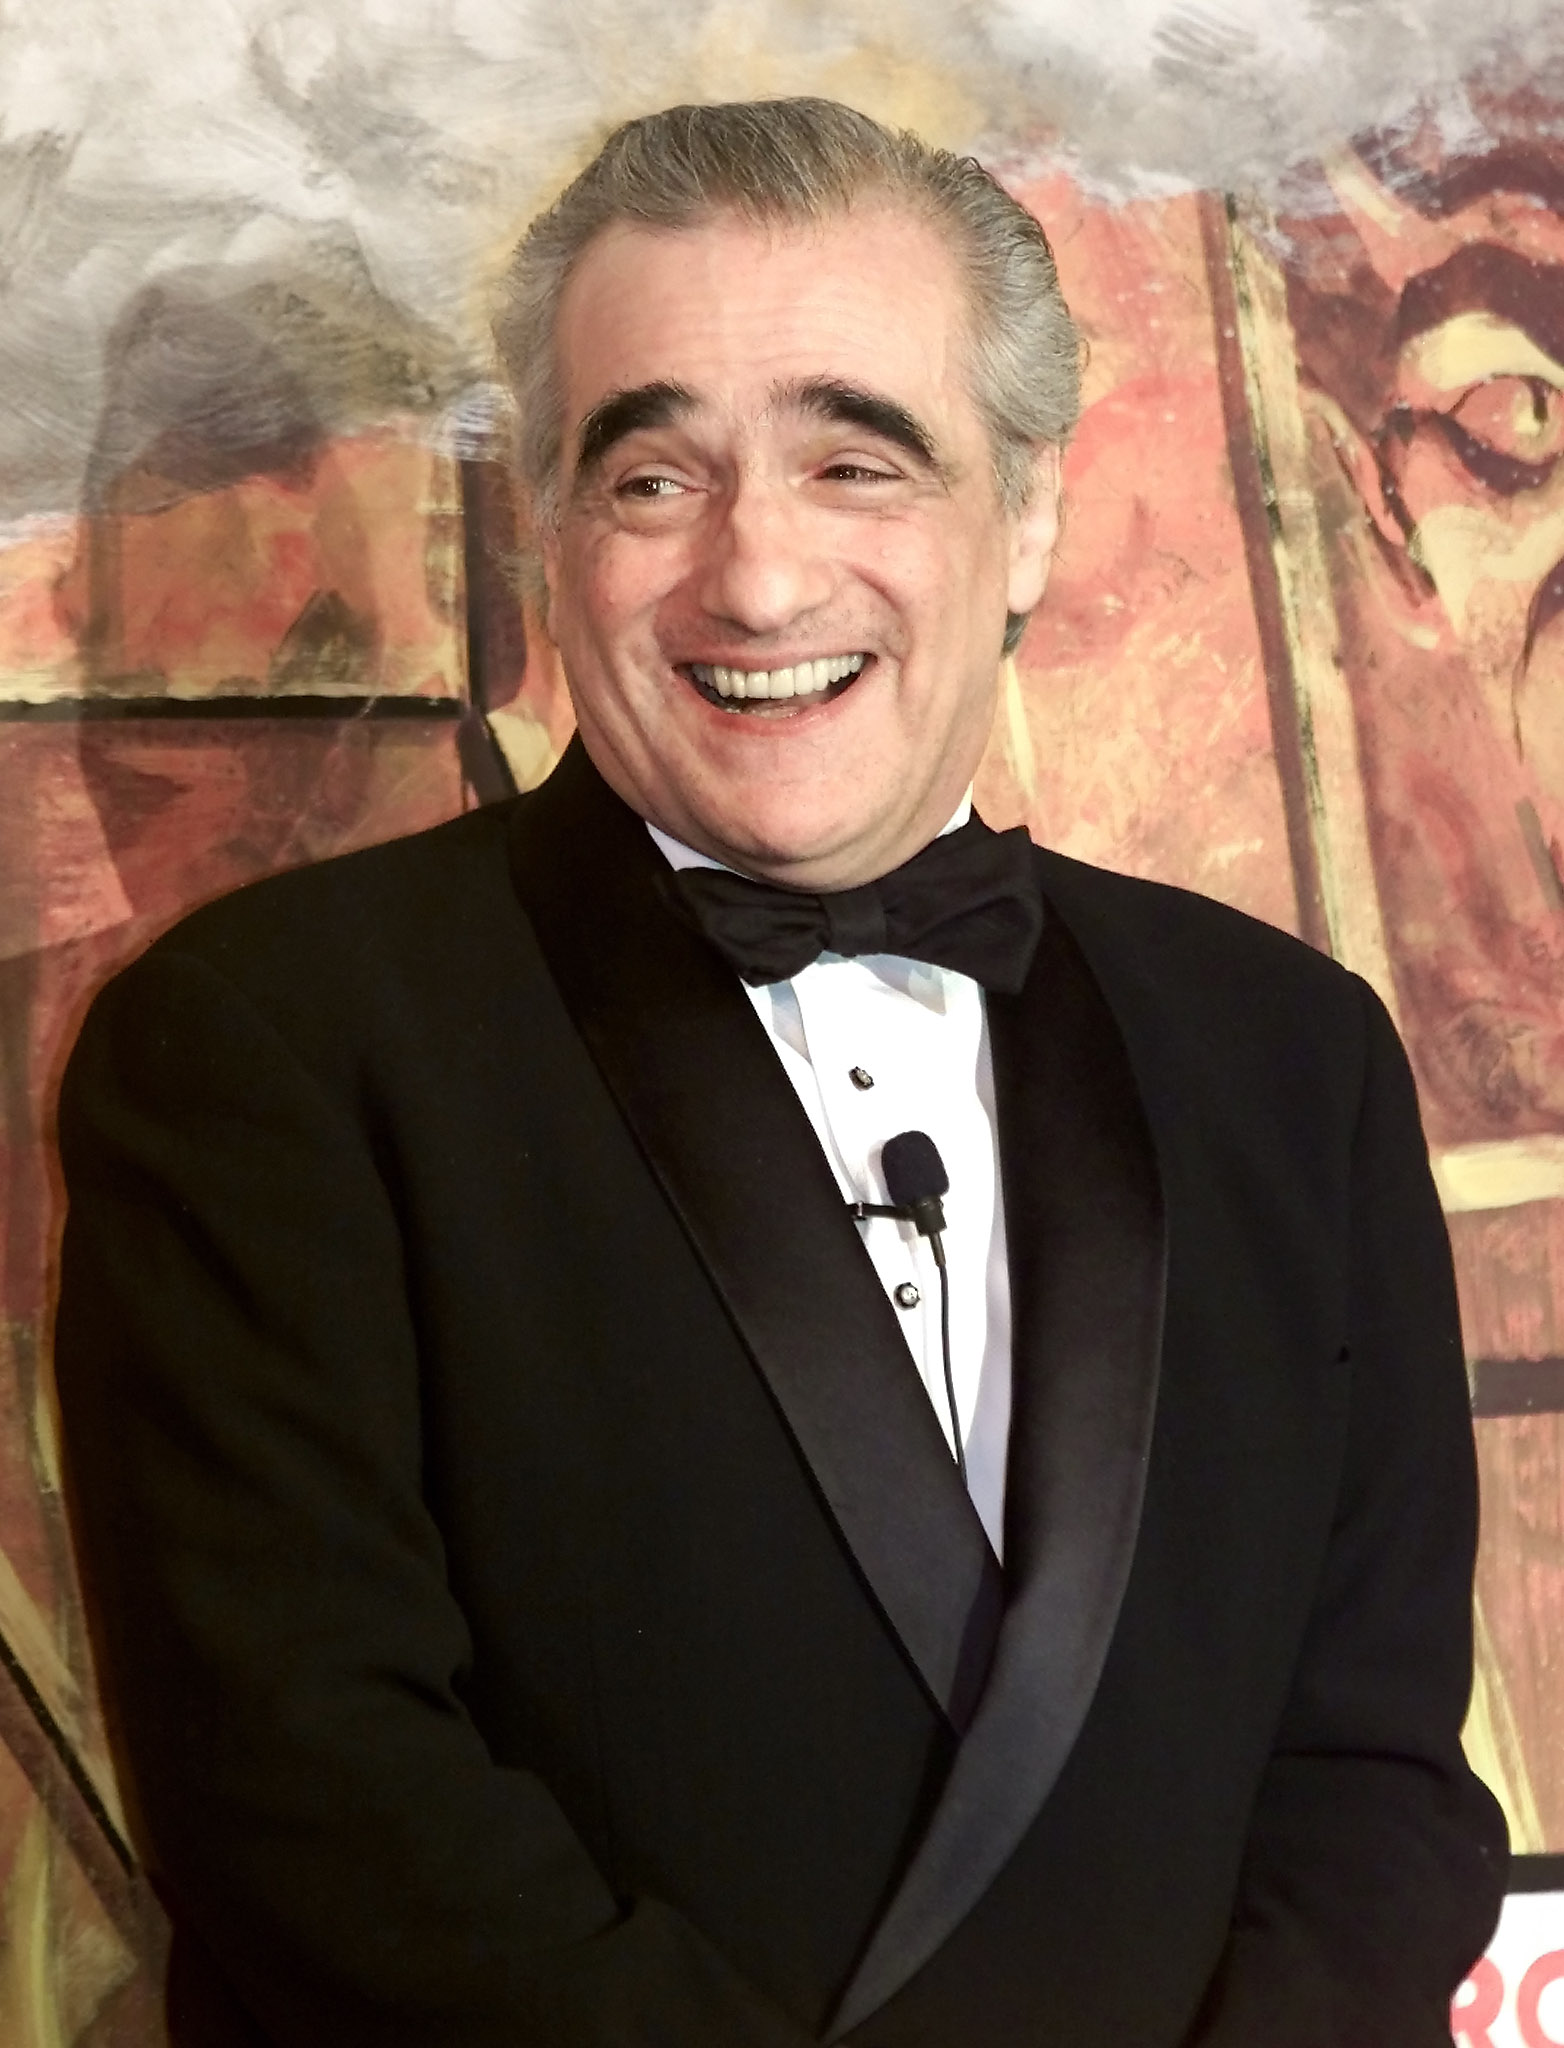 Film director Martin Scorsese smiles during ceremonies at Harvard University's Hasty Pudding Theatricals Club February 13, 2003 in Cambridge, Massachusetts. Scorsese was given the Hasty Pudding 2003 Man of the Year Award during the festivities. REUTERS/Jim Bourg JRB/ME